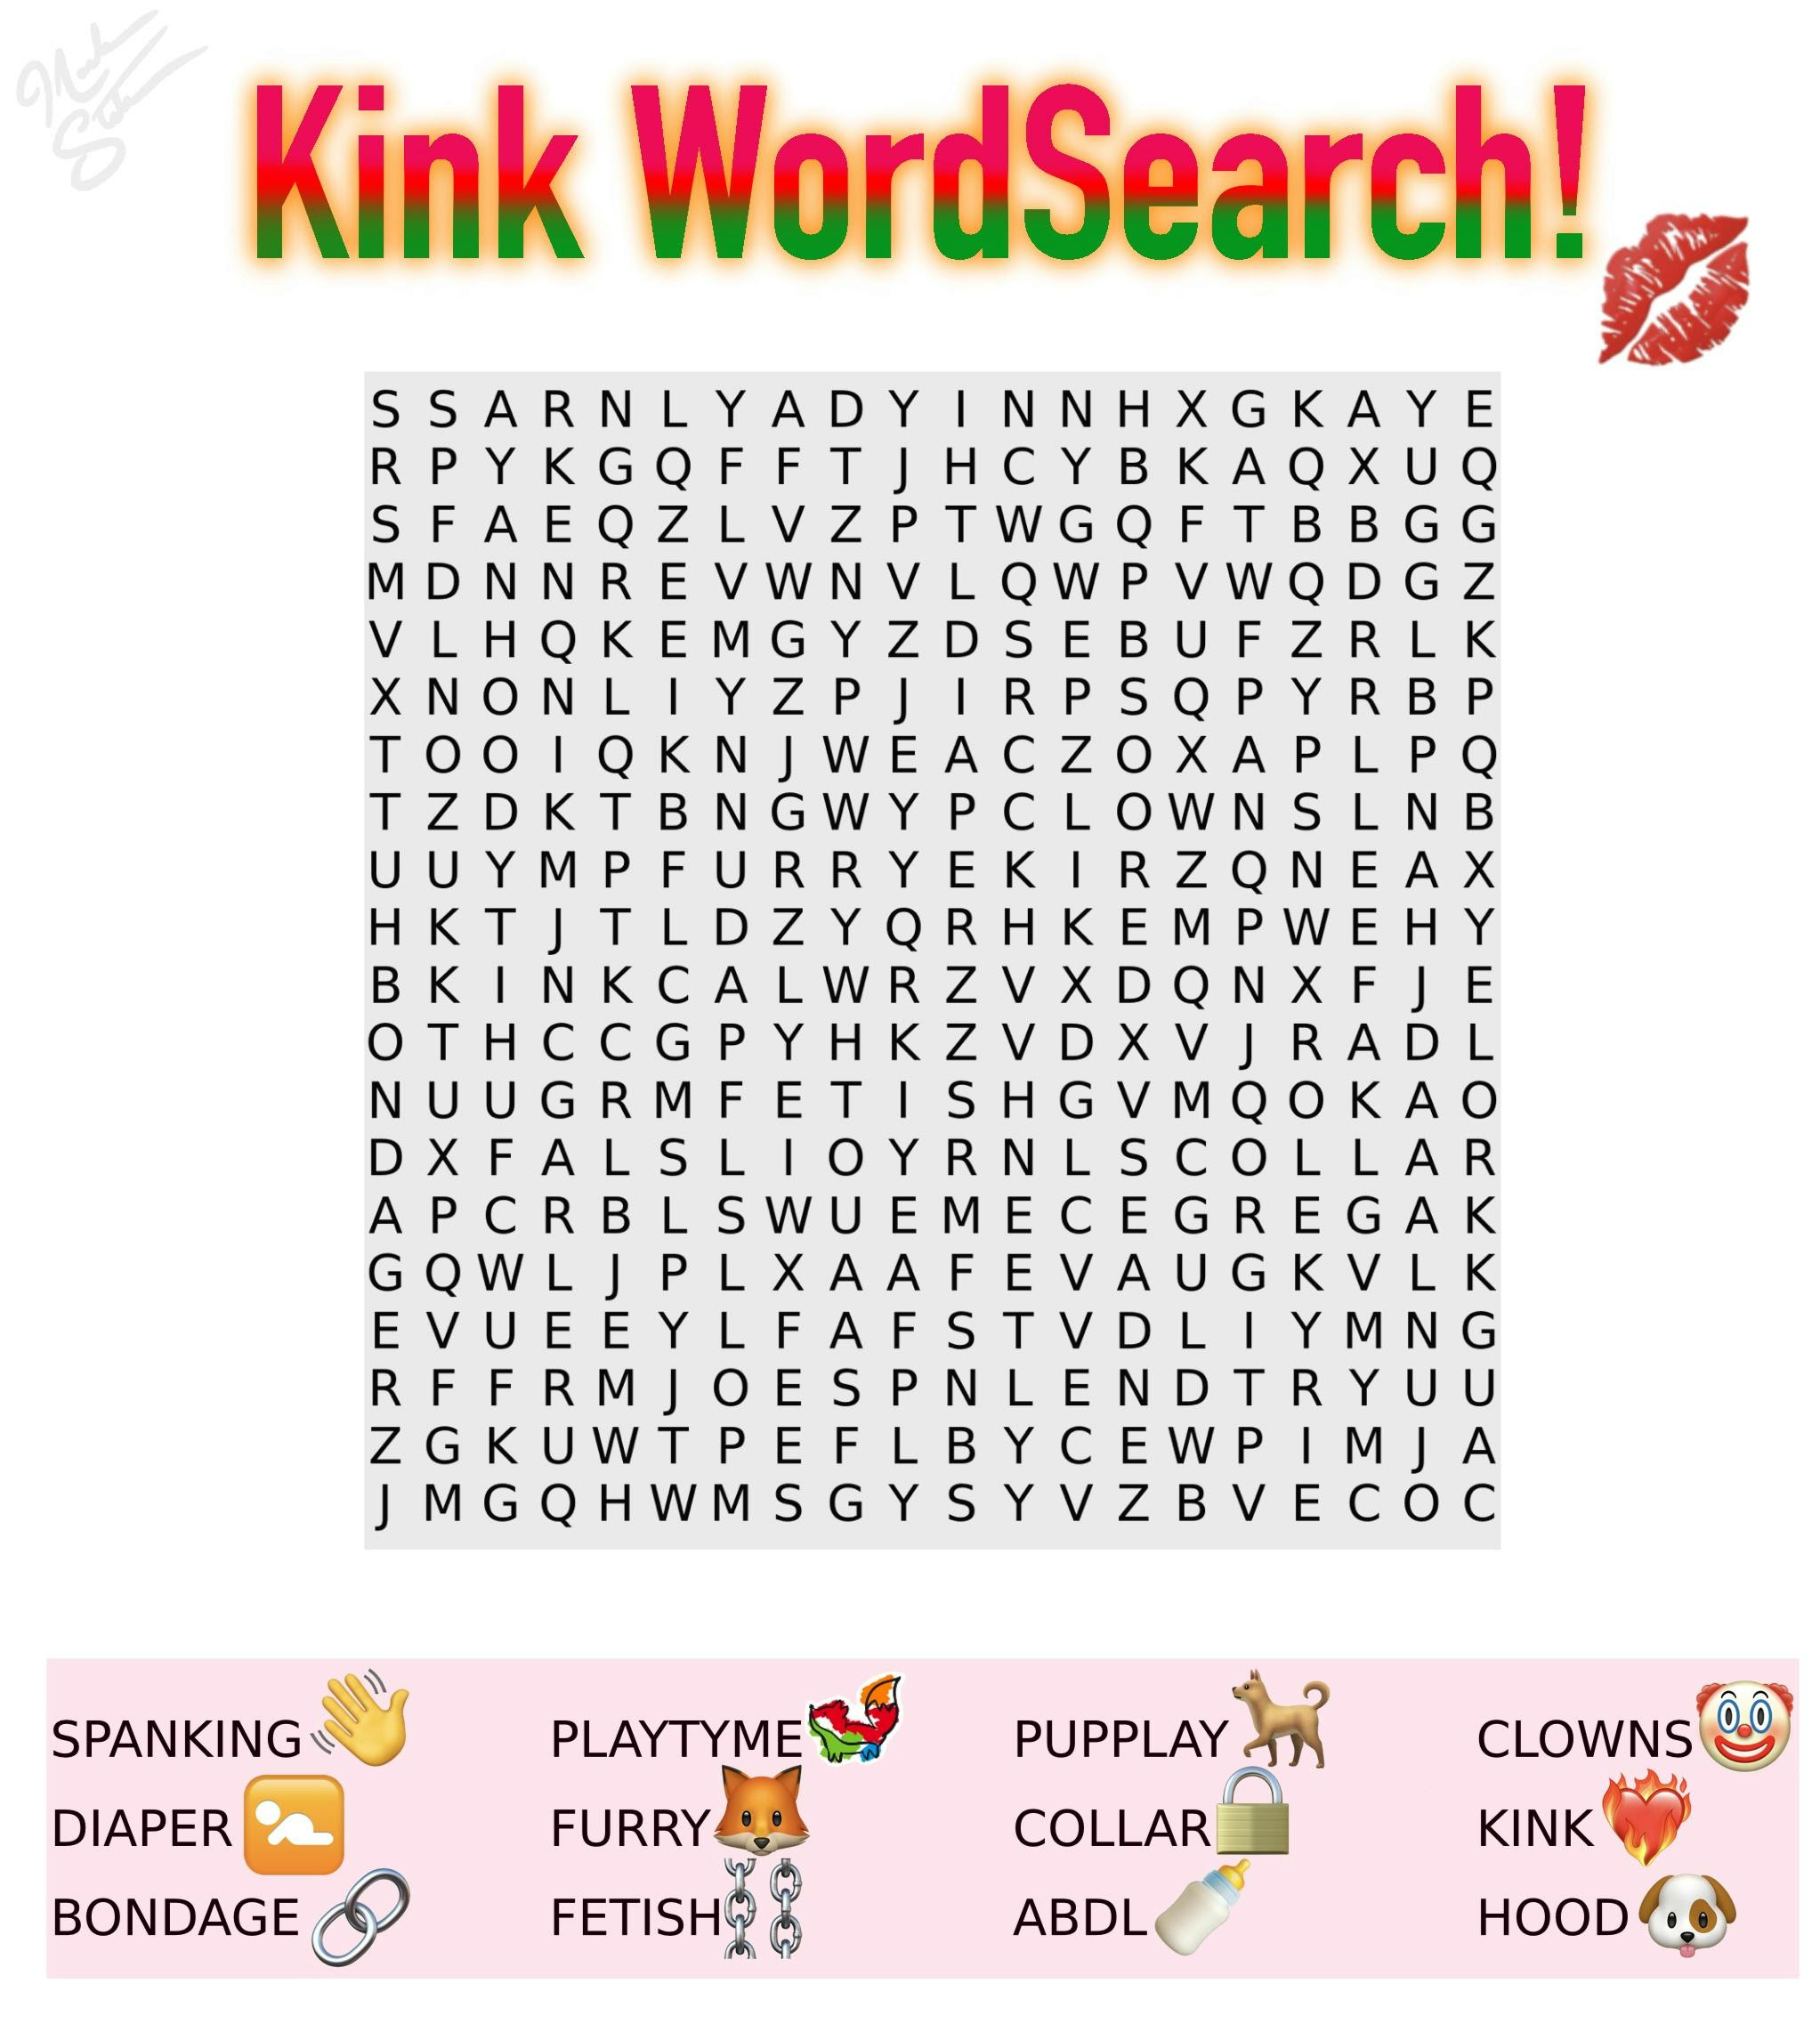 Kink themed word search